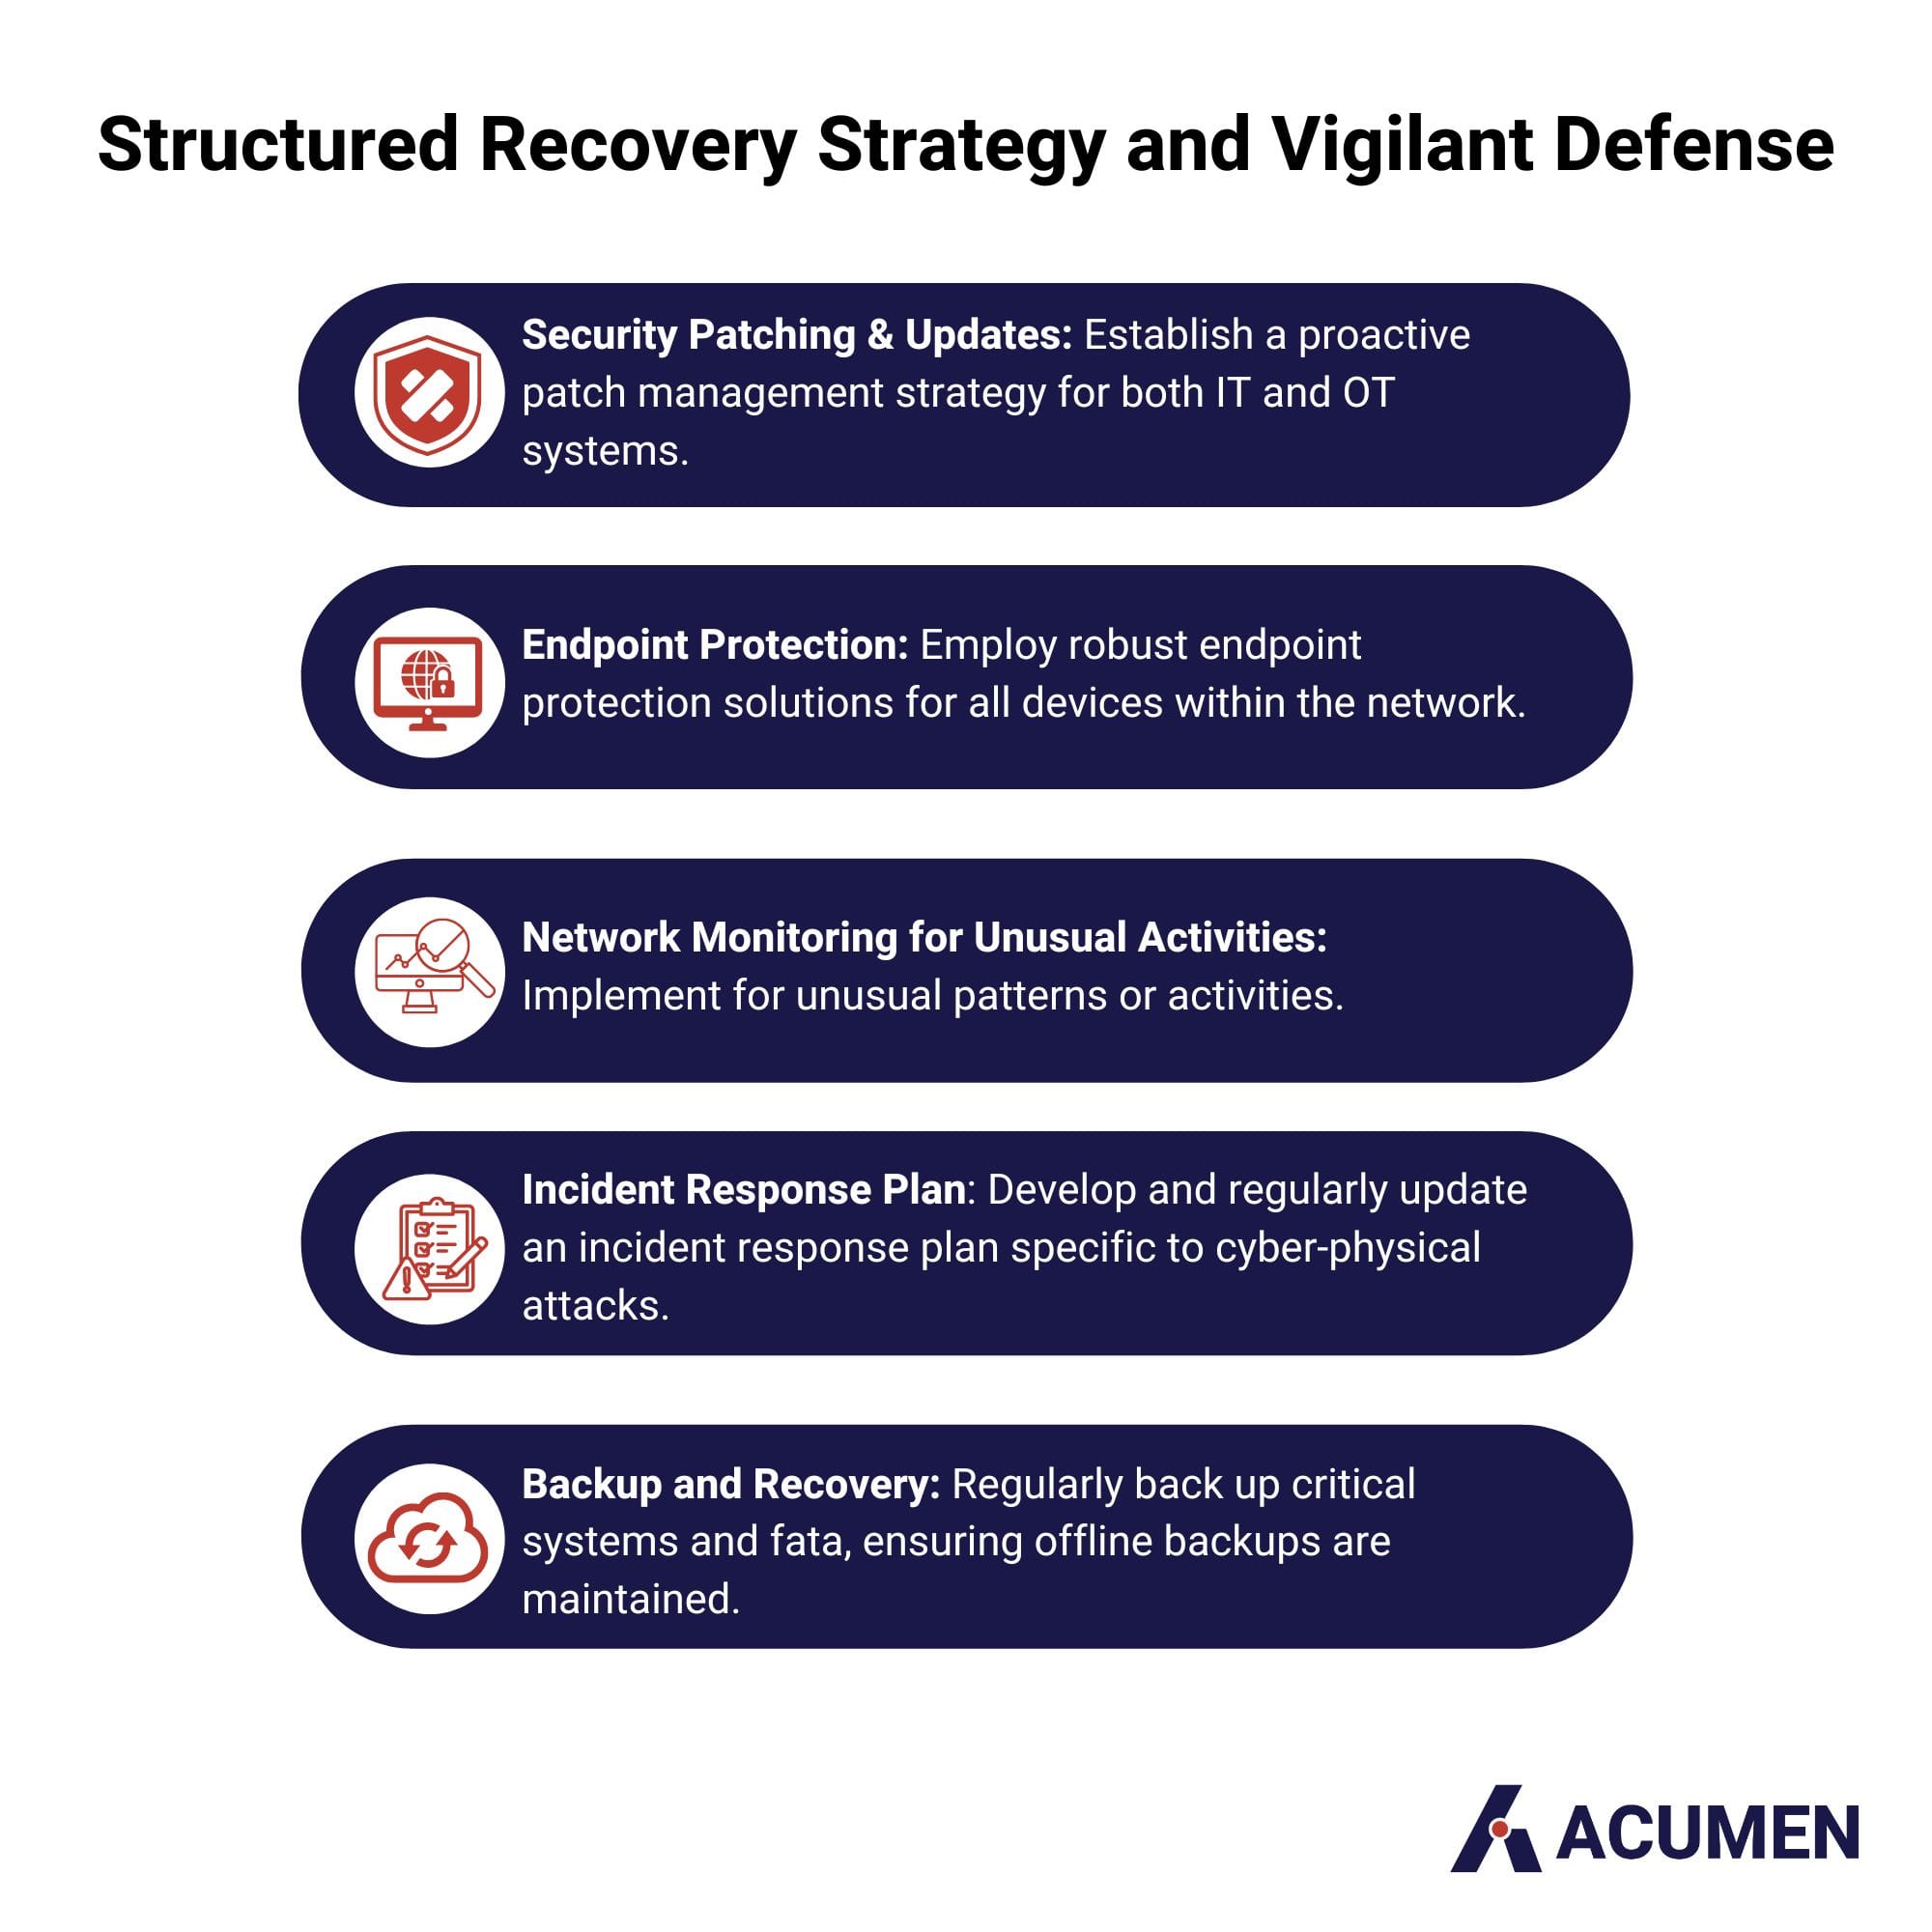 Structured Recovery Strategy and Vigilant Defense